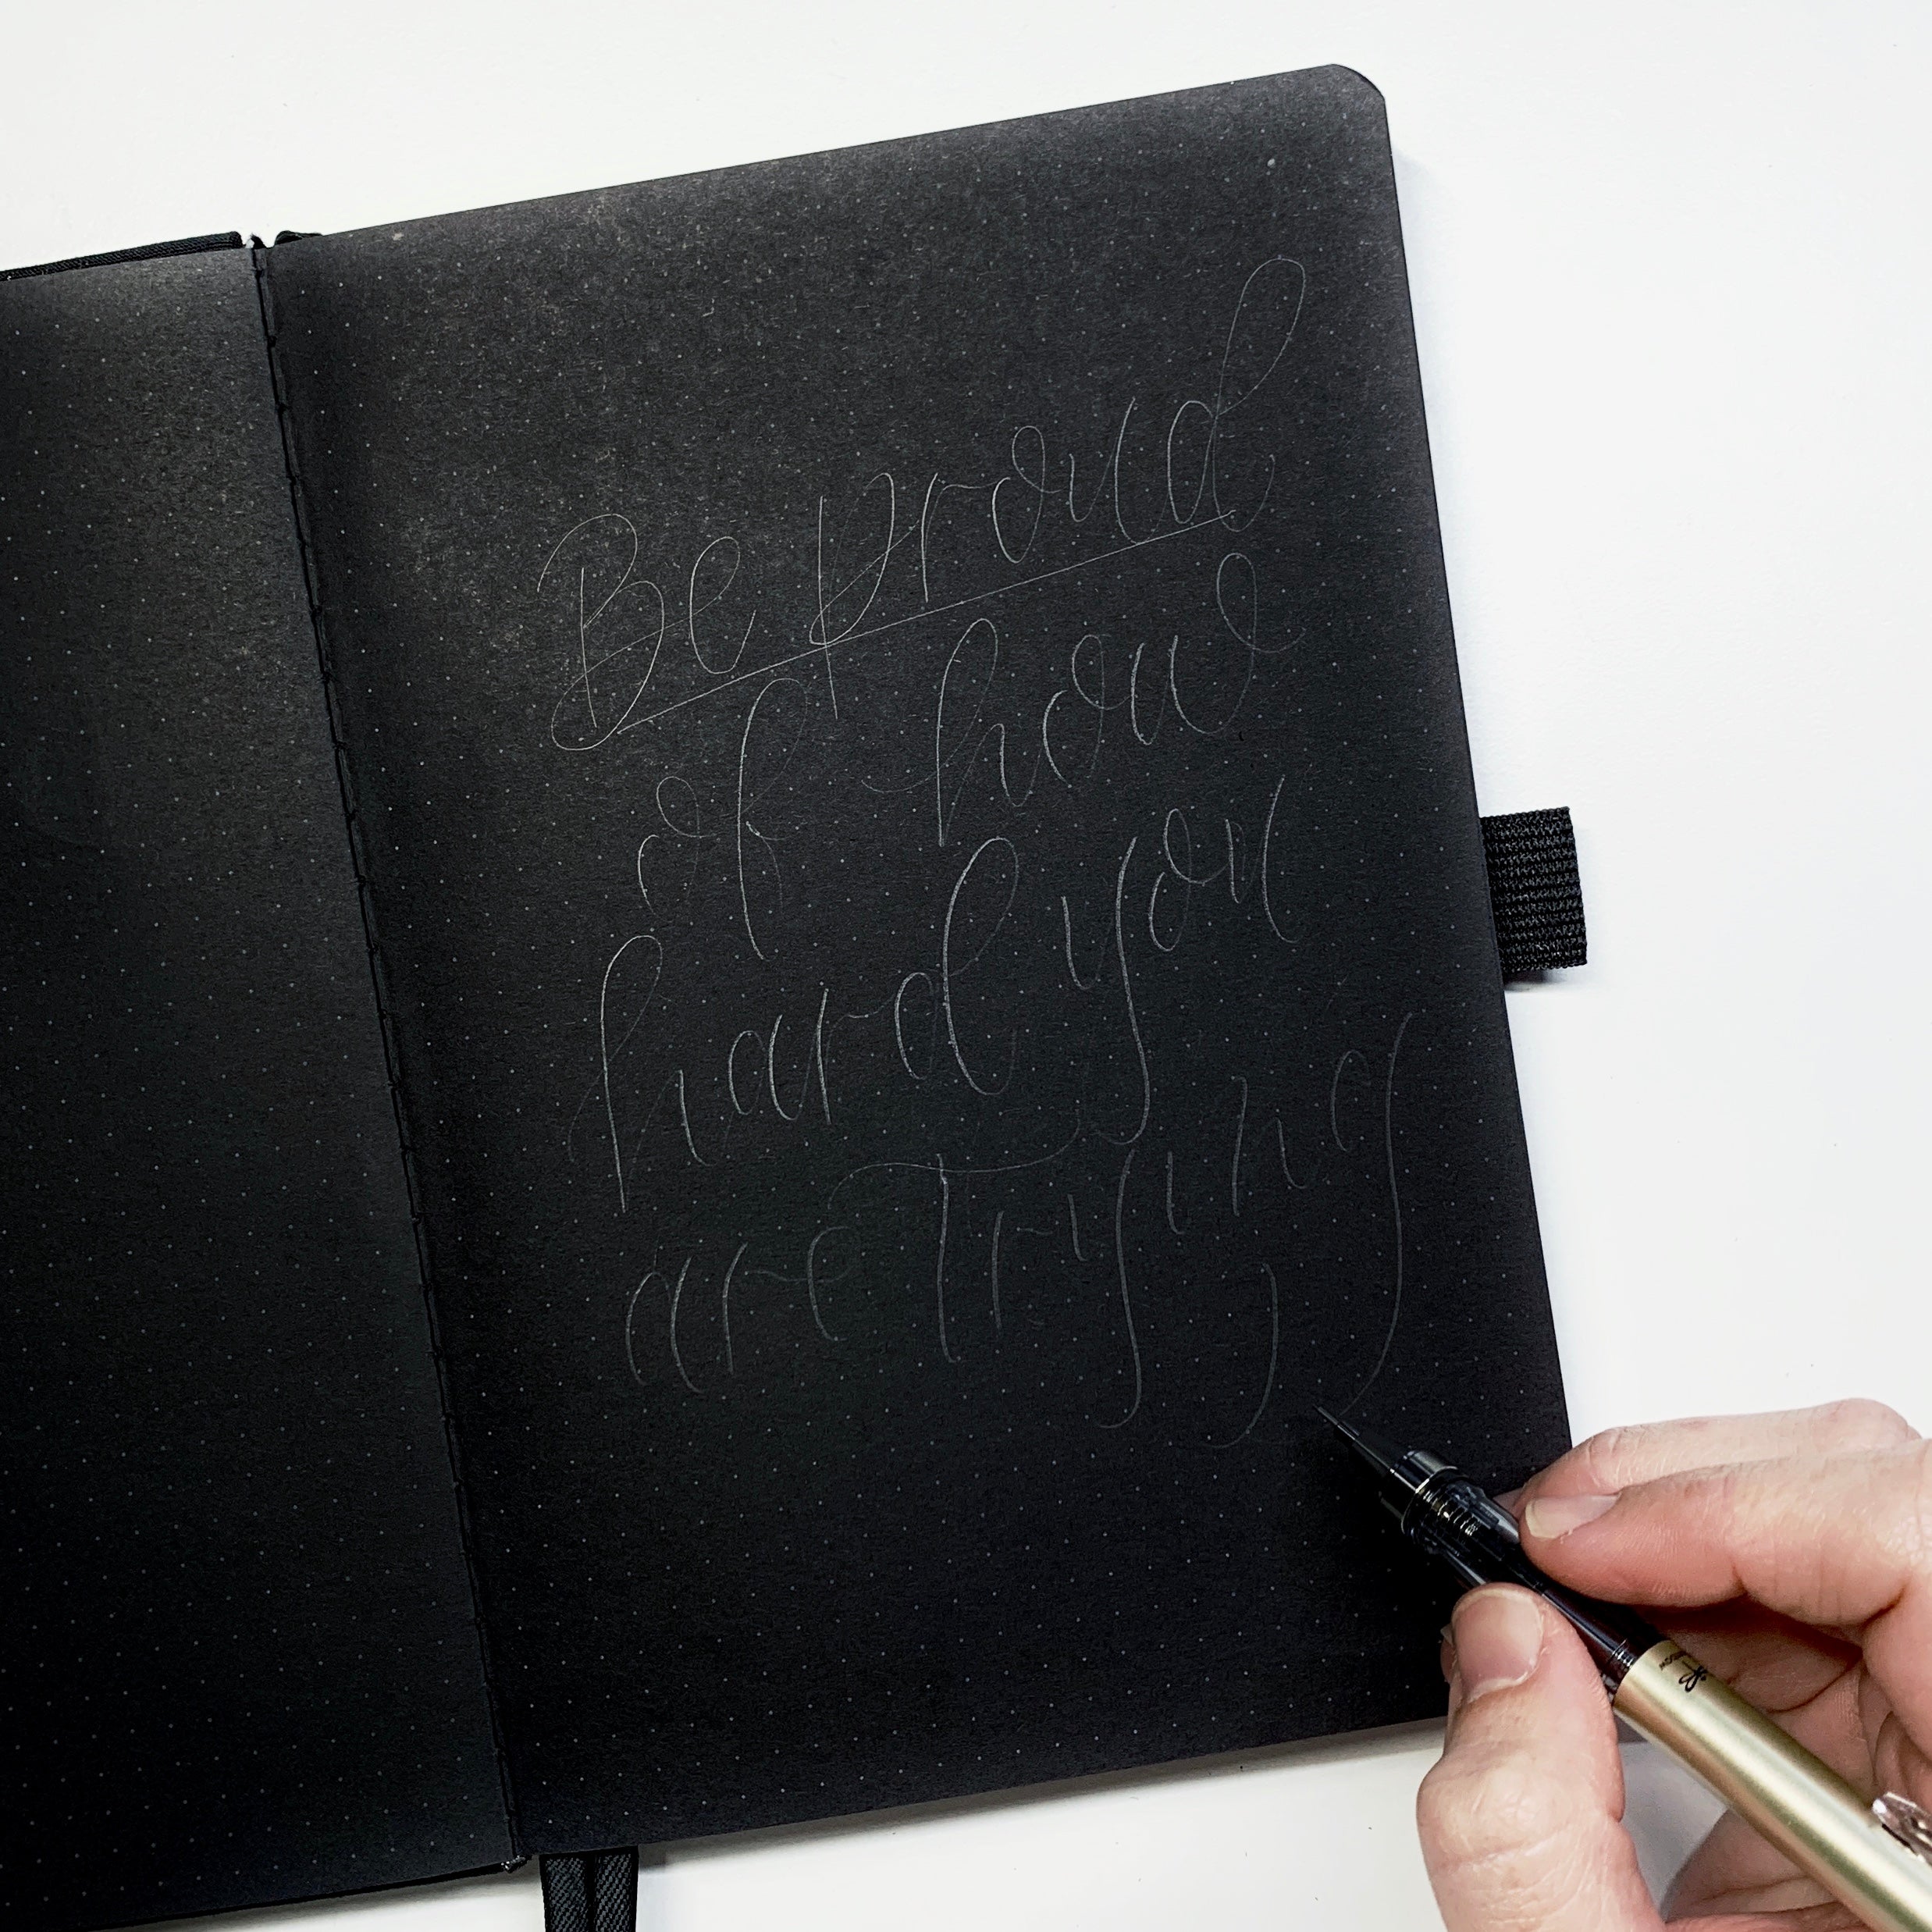 Follow this stippling tutorial in The BLACKOUT BOOK with Adrienne from @studio80design!